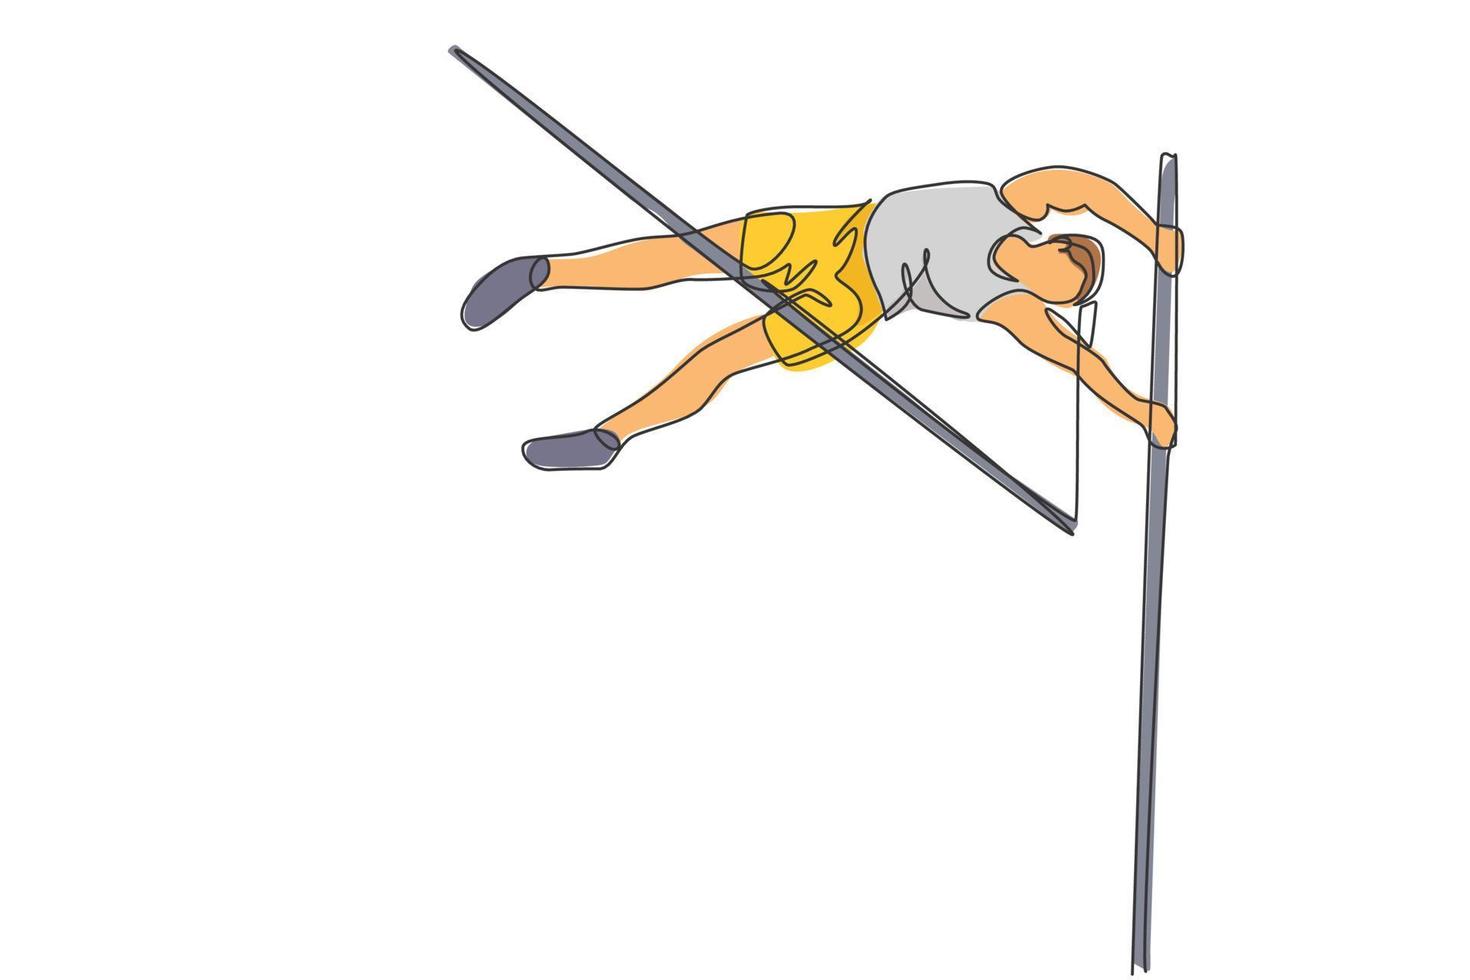 One single line drawing of young energetic woman exercise to pass the bar on pole vault game vector illustration. Healthy athletic sport concept. Competition event. Modern continuous line draw design